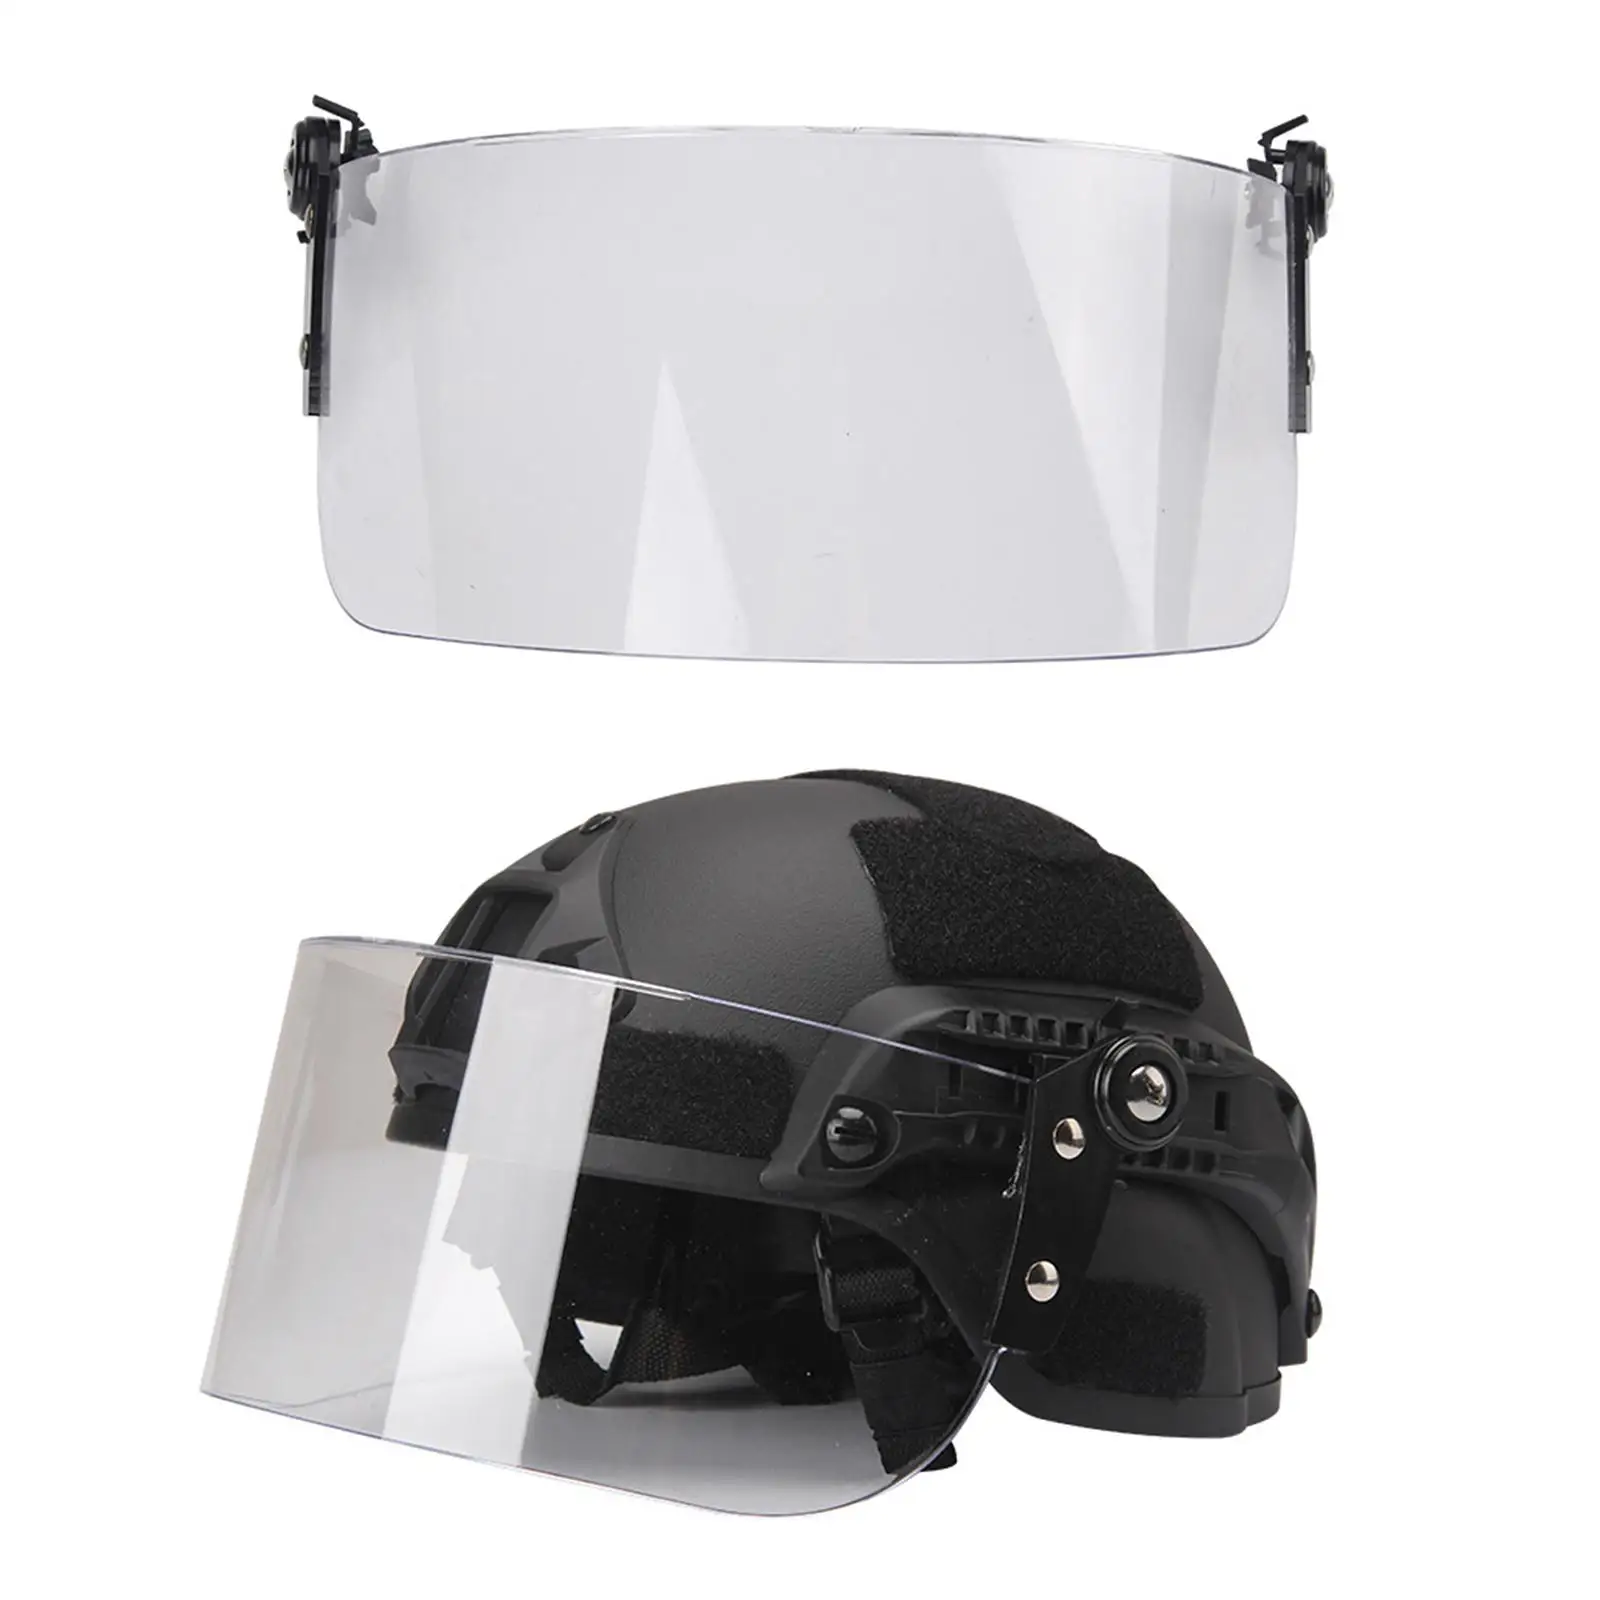 Motorcycle Wind Shield Lens Clear Shield Face Shield for Motocross